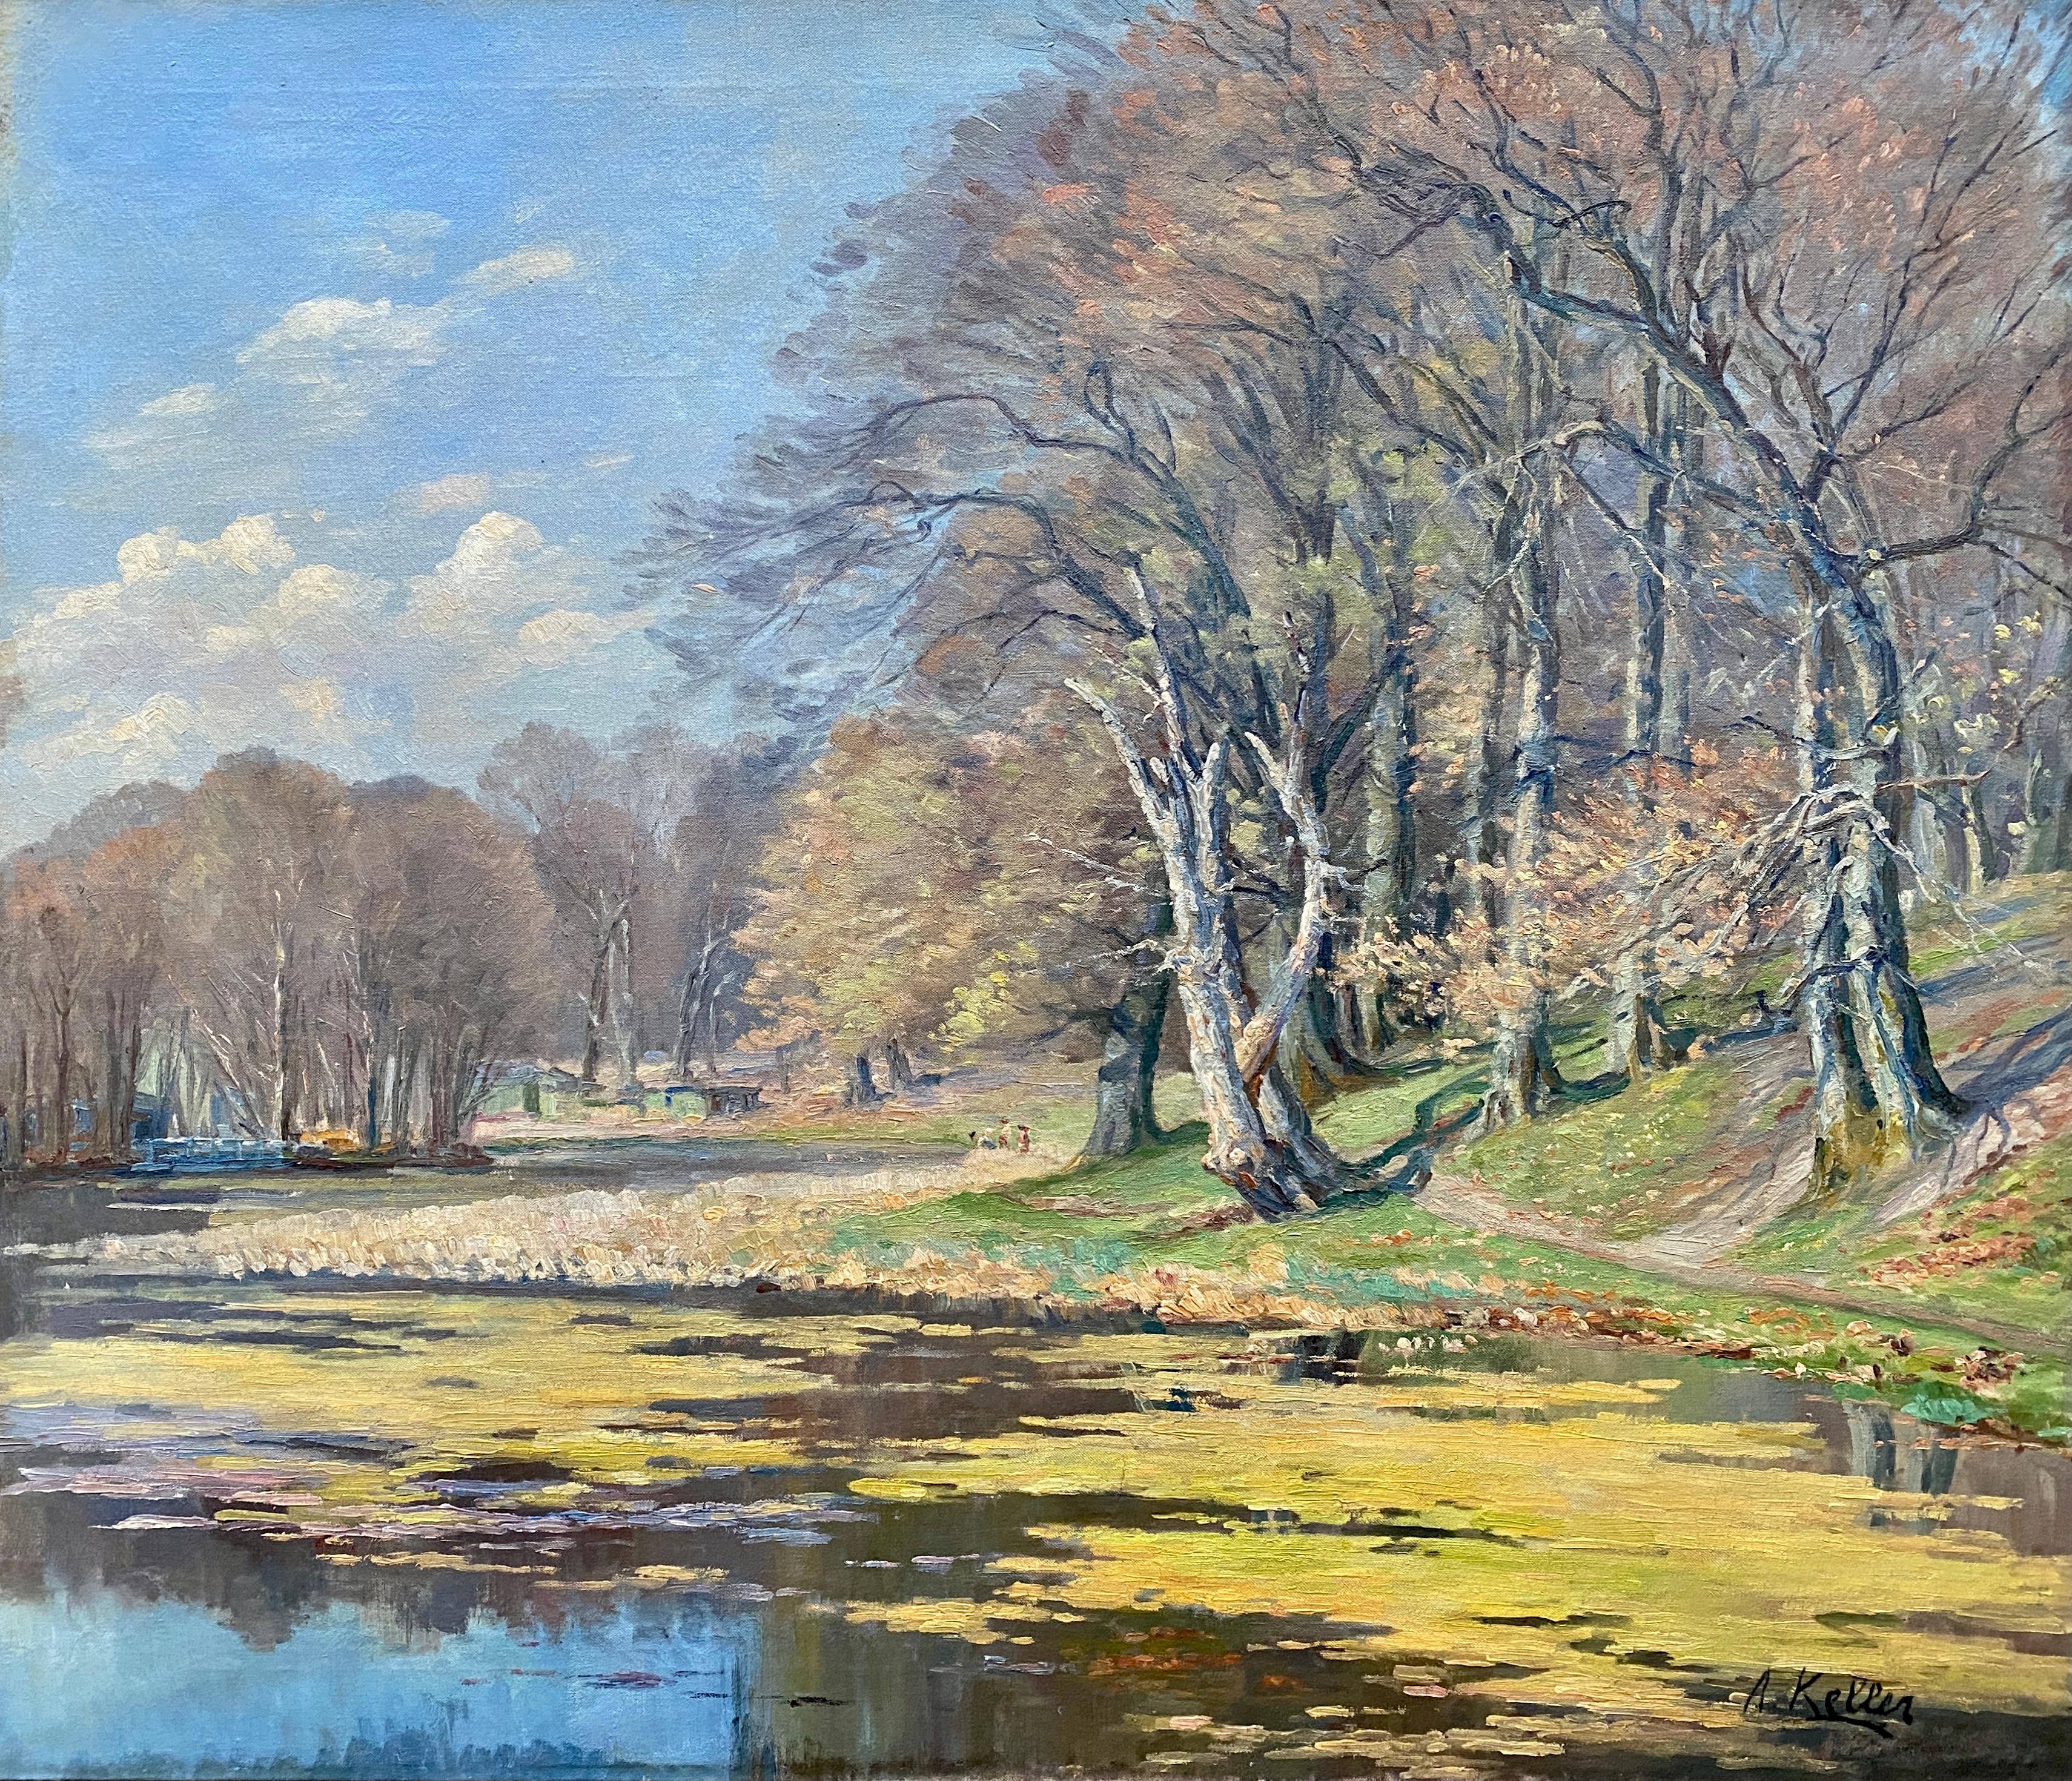 Along the Lake

Keller Adolphe 
Brussels 1880 – 1968
Belgian Painter
Signature: Signed bottom right

Medium: Oil on canvas
Dimensions: Image size 51 x 61 cm

Biography: Keller Adolphe was born on June 21 in 1880 in Brussels. He was a